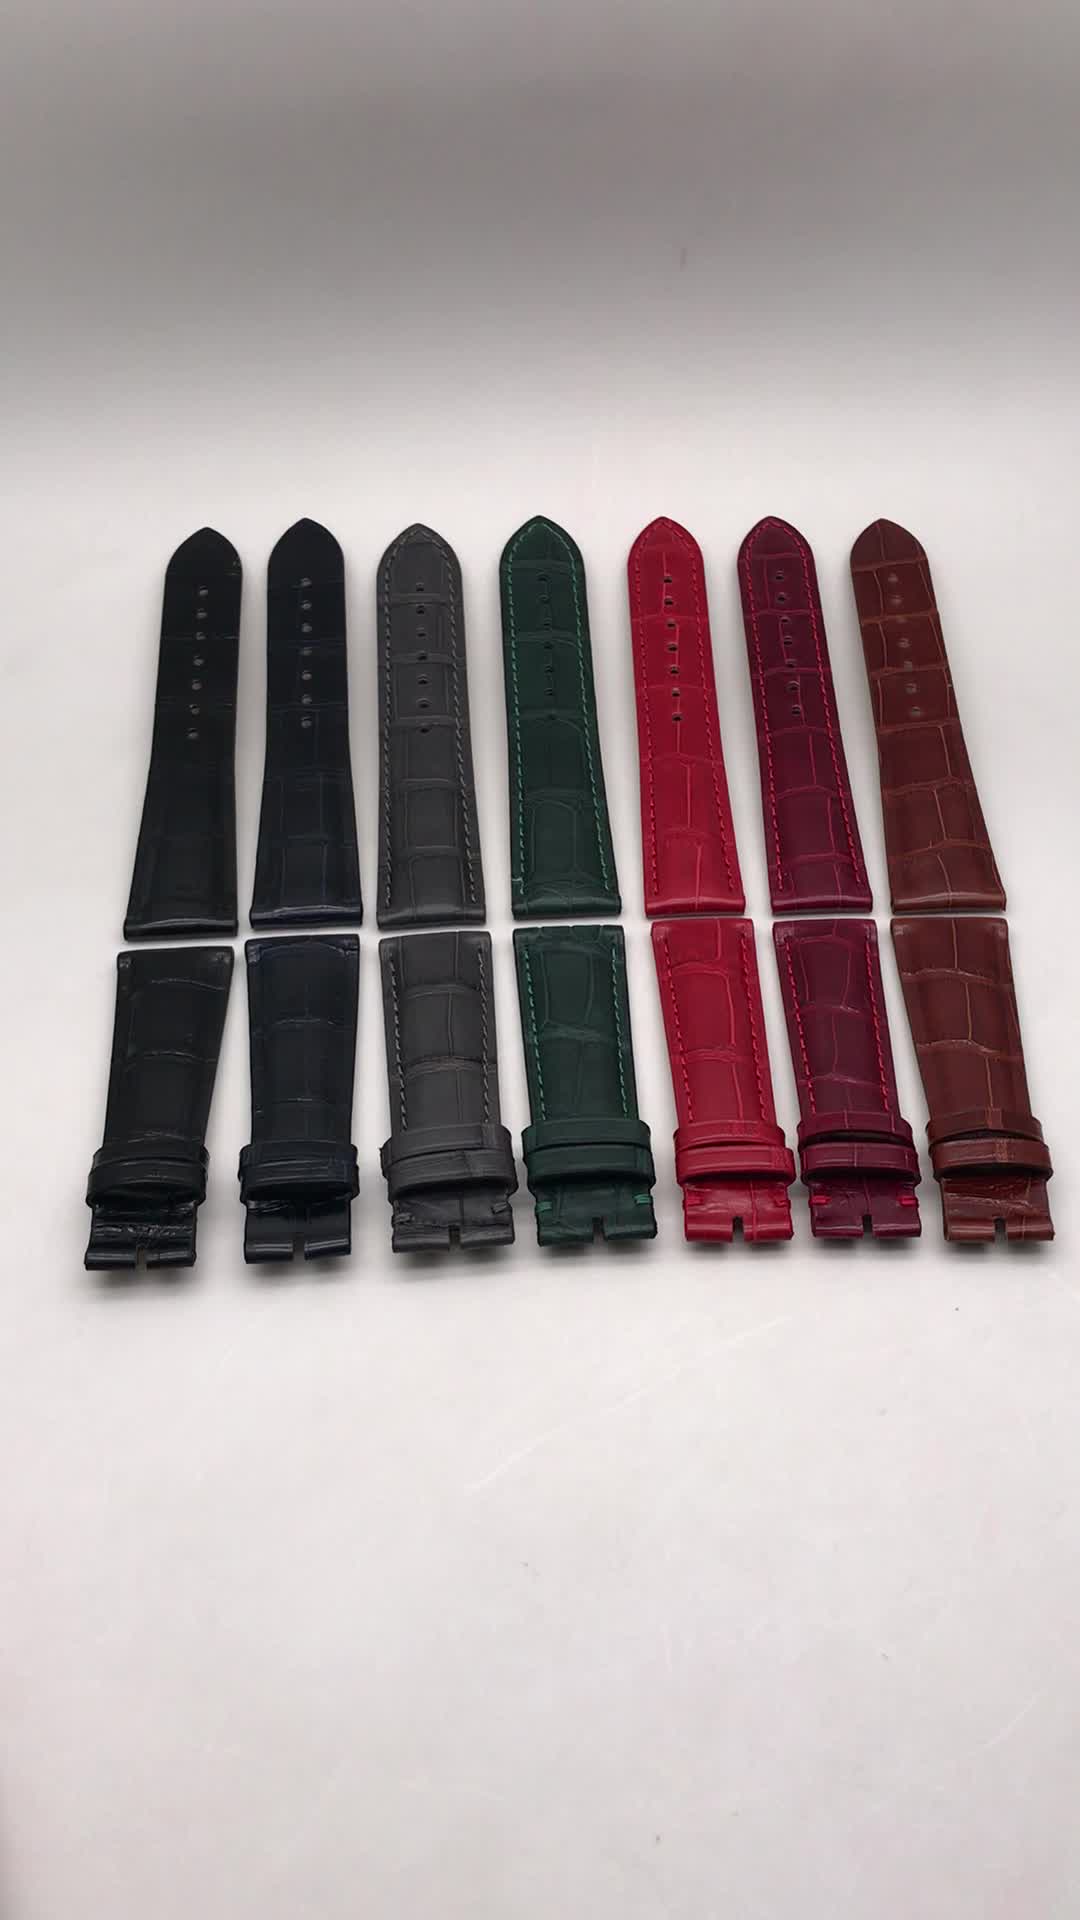 Odian Jewelry Leather Material watch straps genuine leather alligator crocodile replacment watch bands